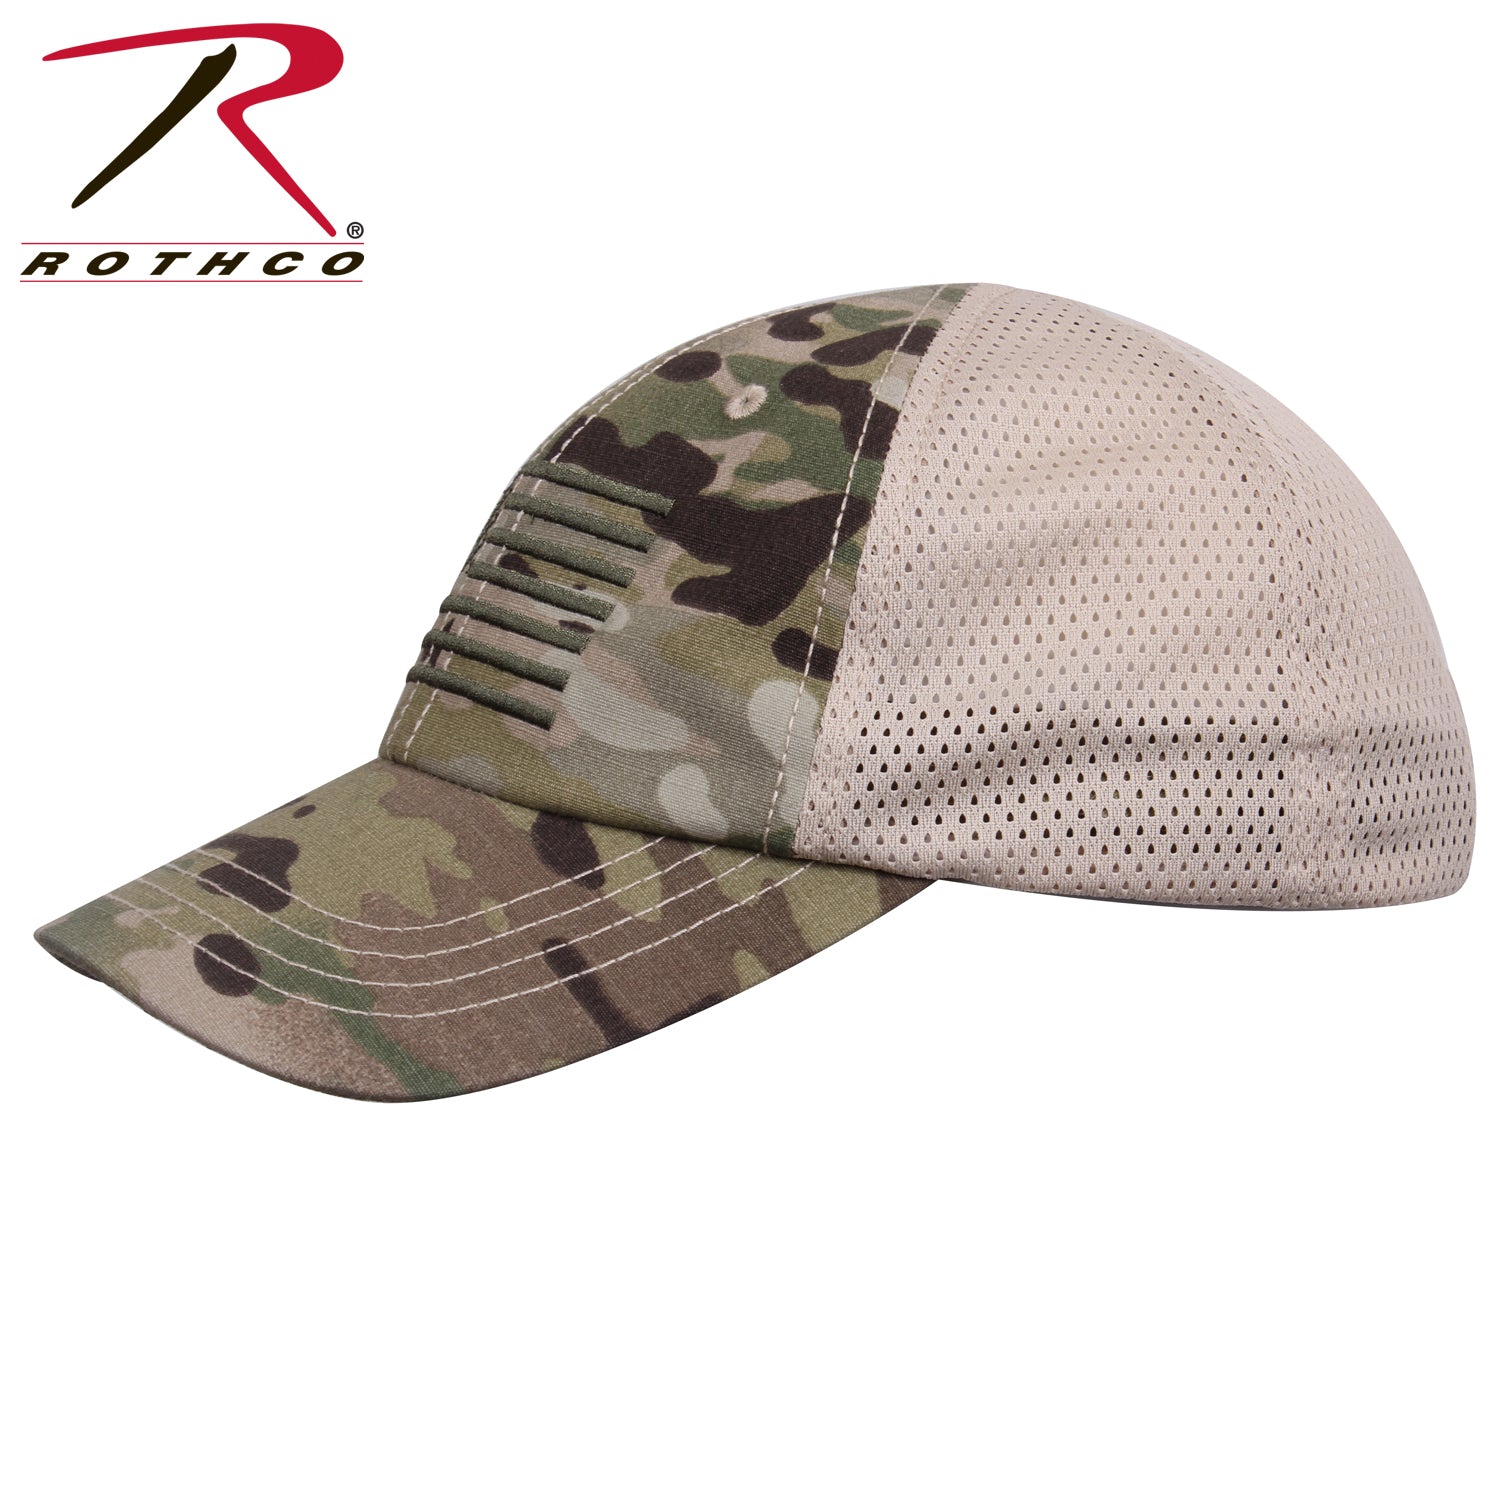 Rothco Tactical Mesh Back Cap With Embroidered US Flag